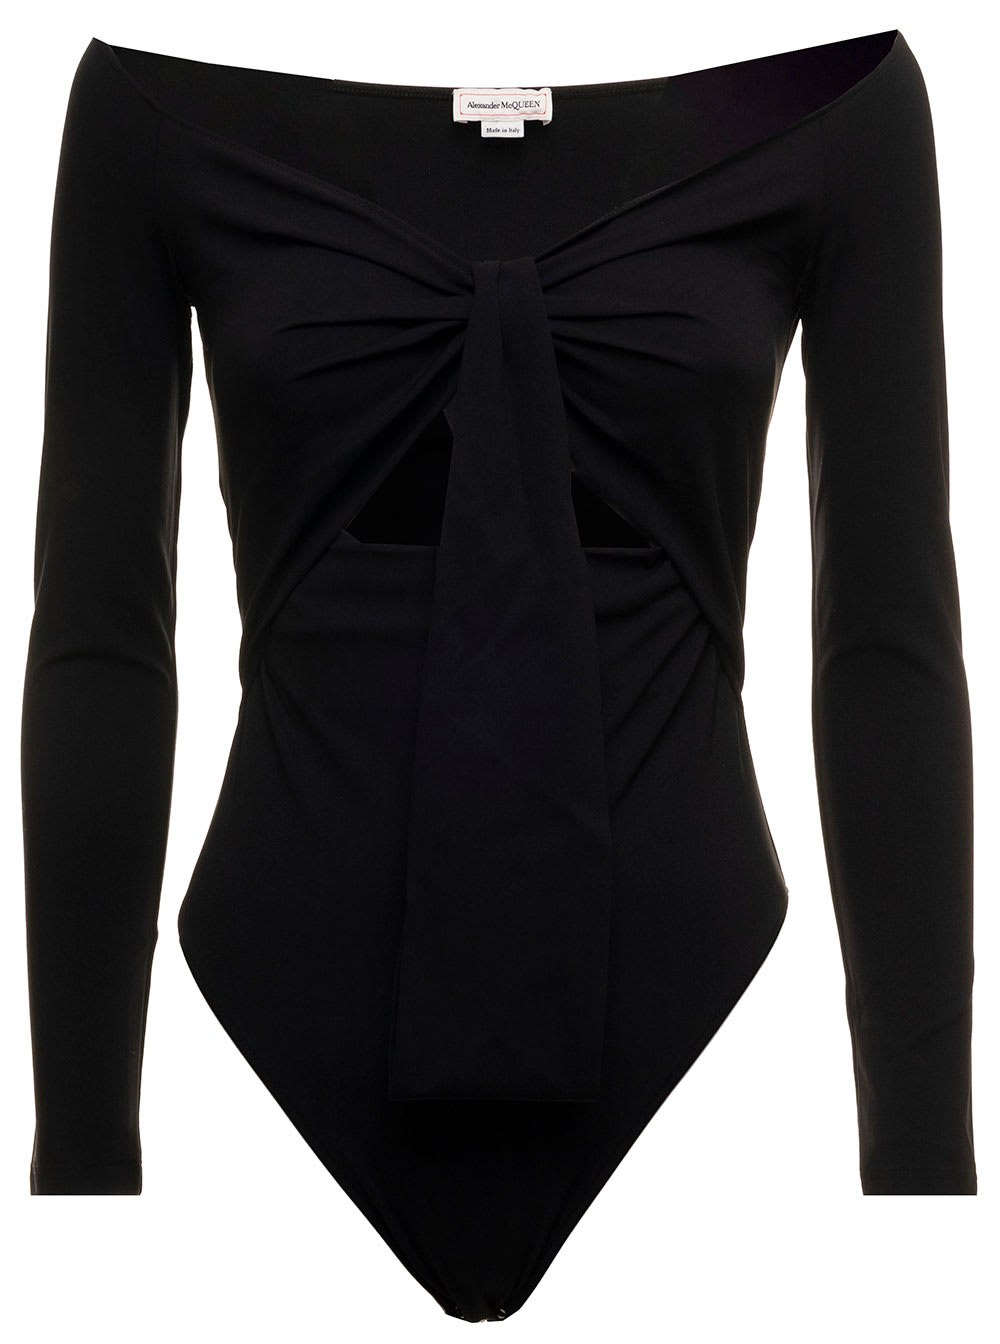 Alexander McQueen Black Stretch Fabric Body With Cut Out Inserts Woman